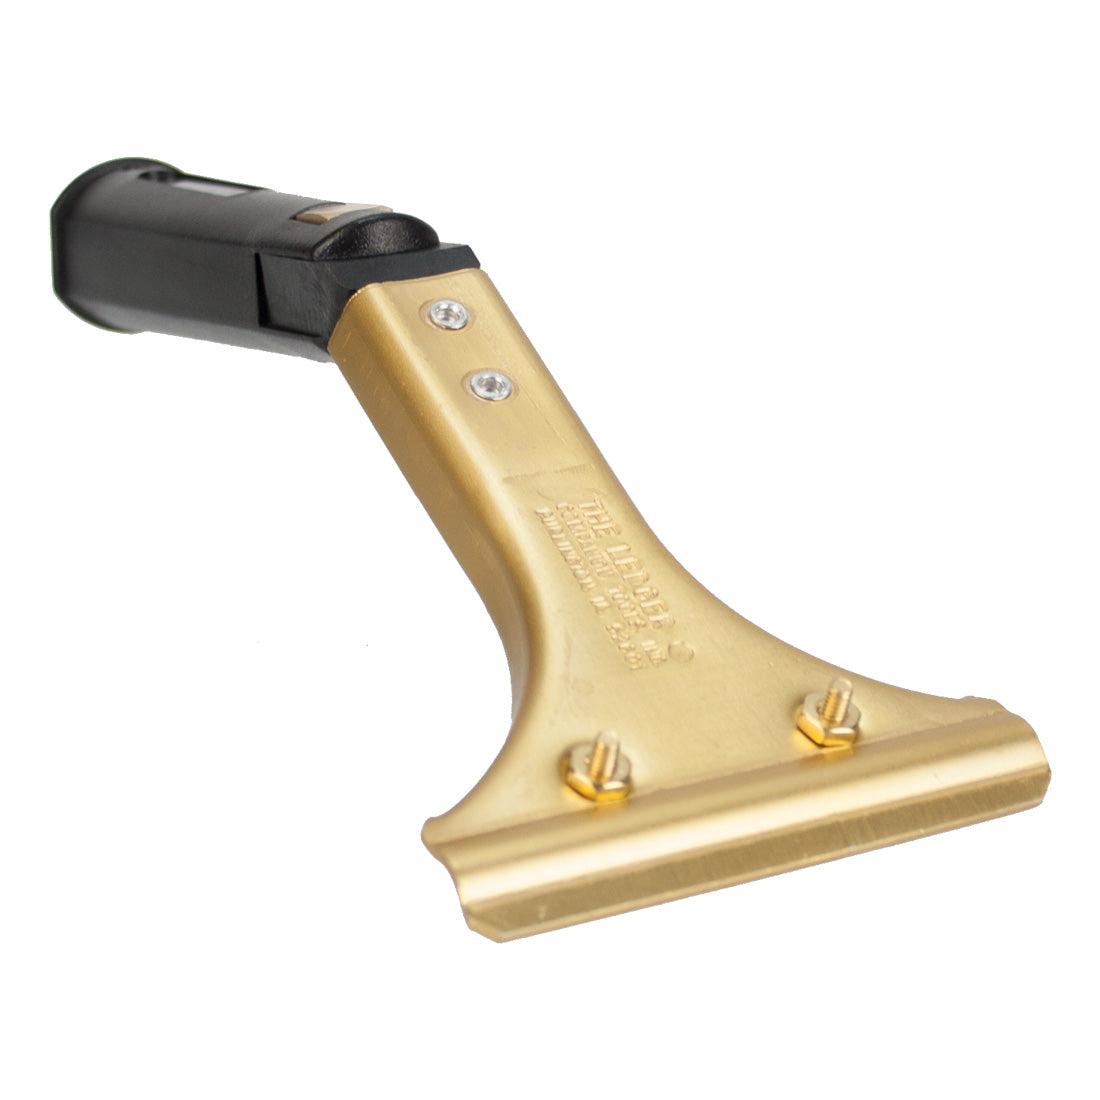 Companion Tools Ledger Squeegee Handles Swivel Top View